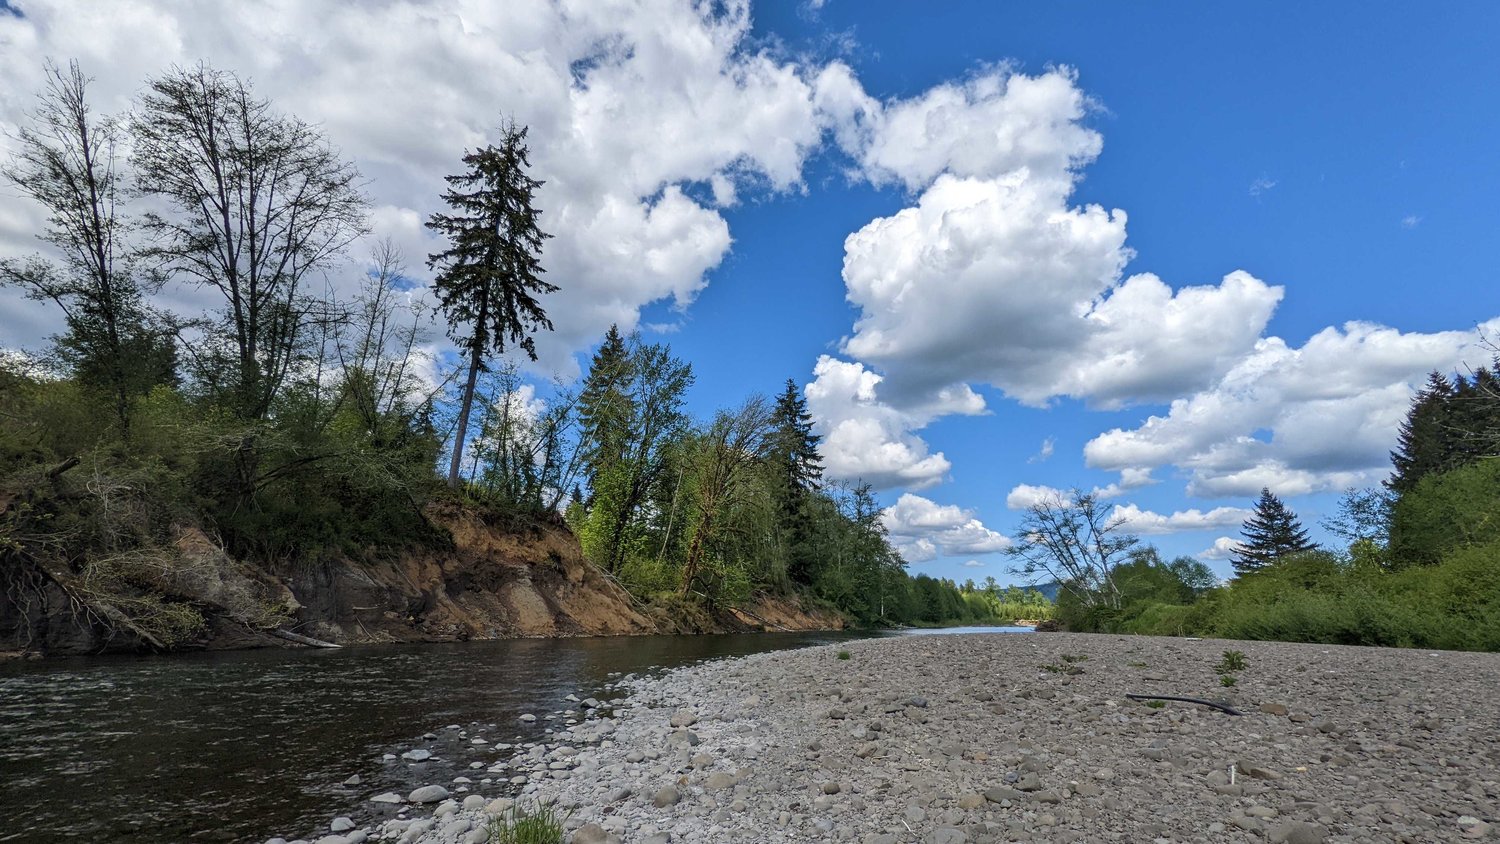 Clouds form over the Chehalis River on Saturday near an eroded bank with downed trees.